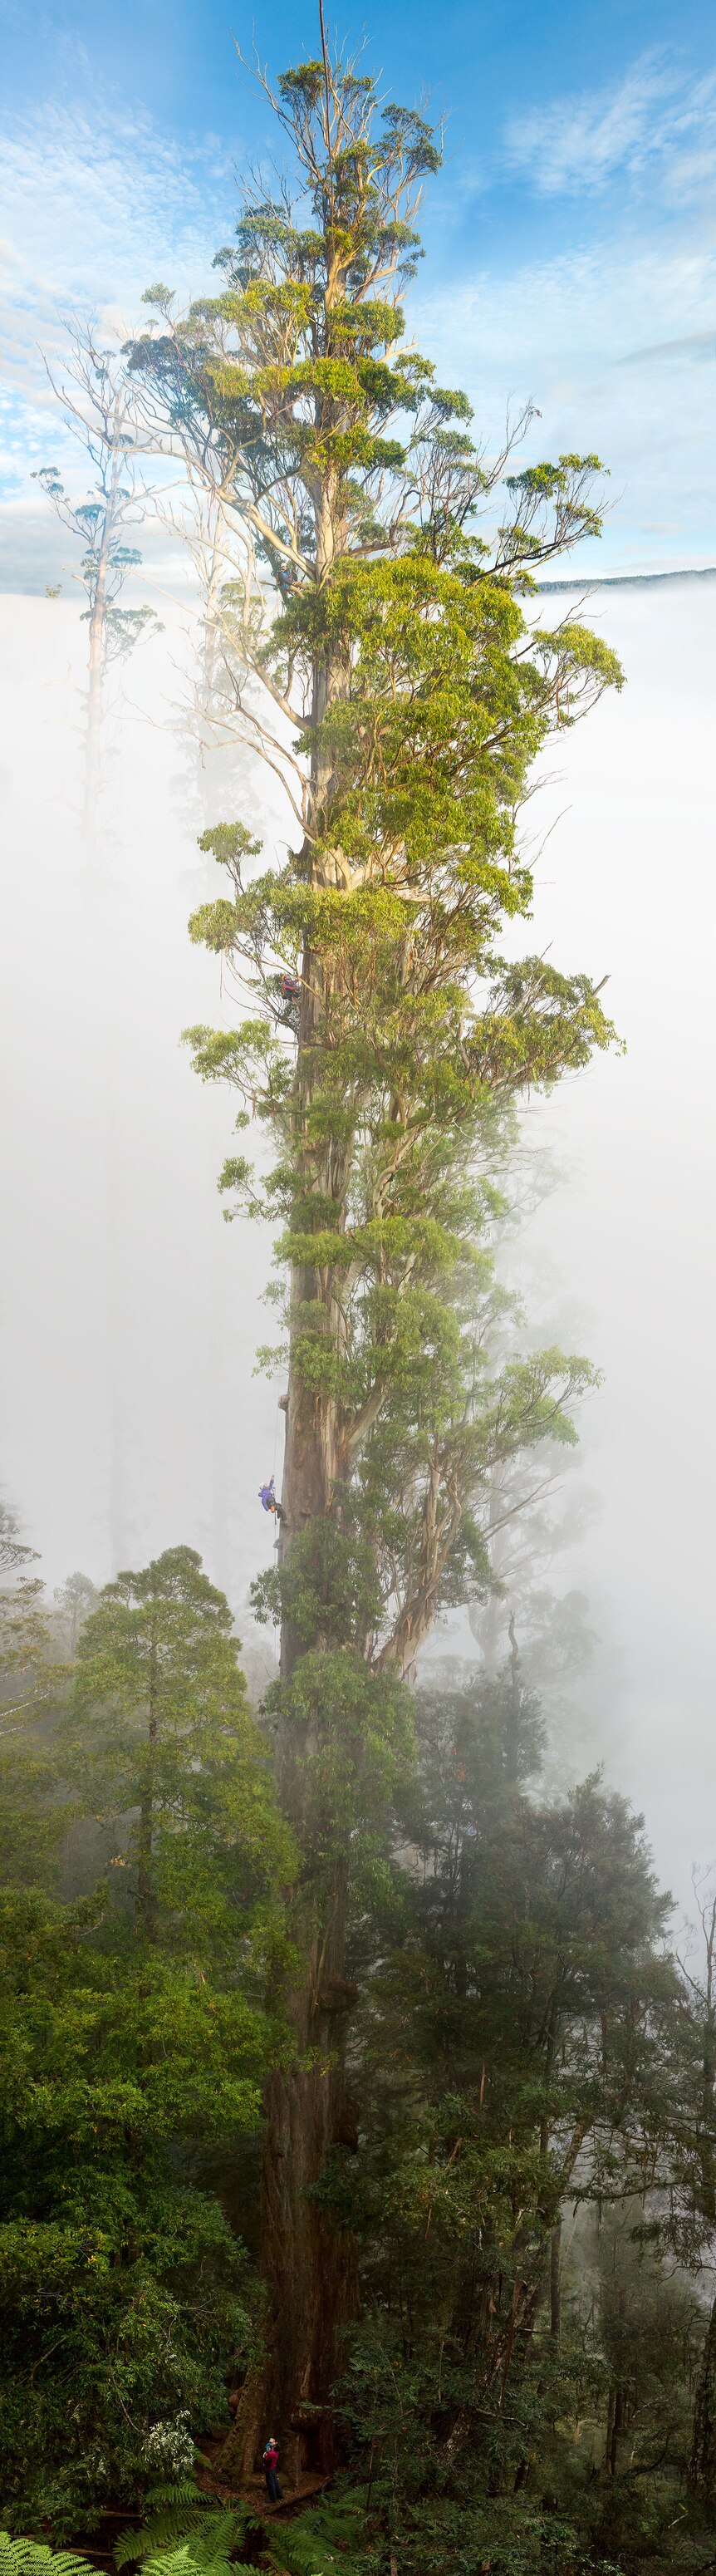 A full length portrait of the tree Gandalf's Staff, coming out of the clouds